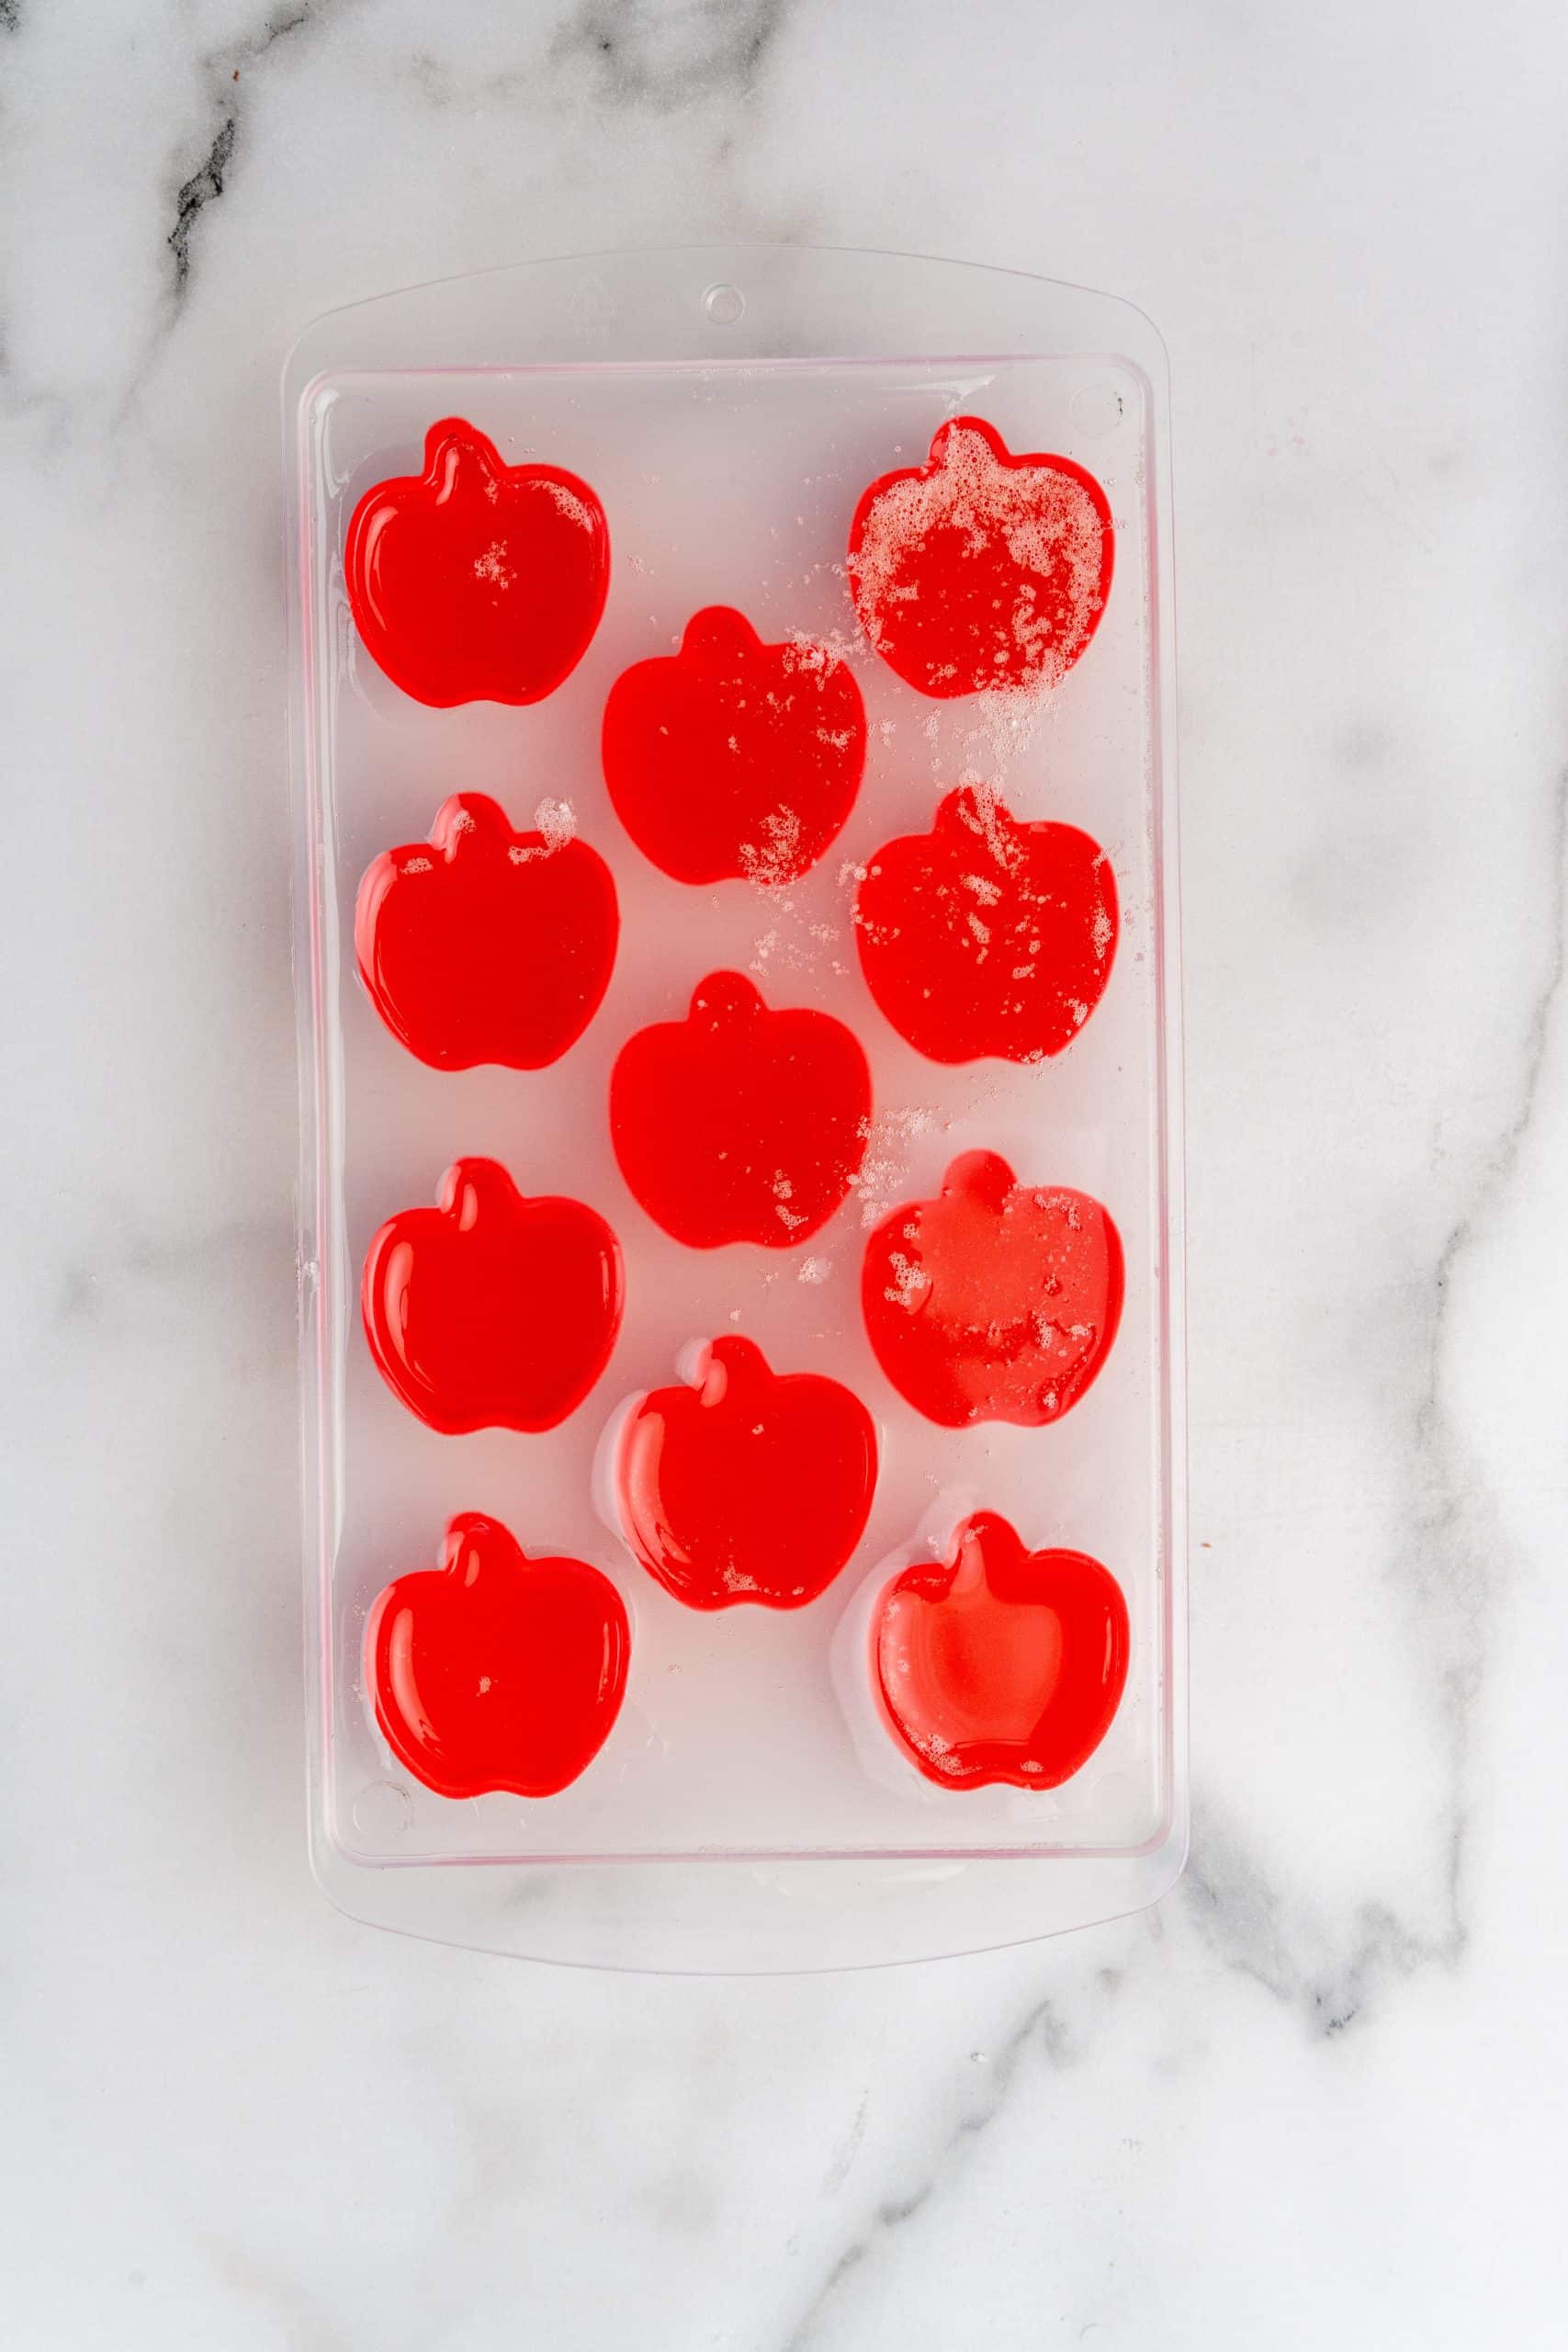 coconut oil poured into silicone molds